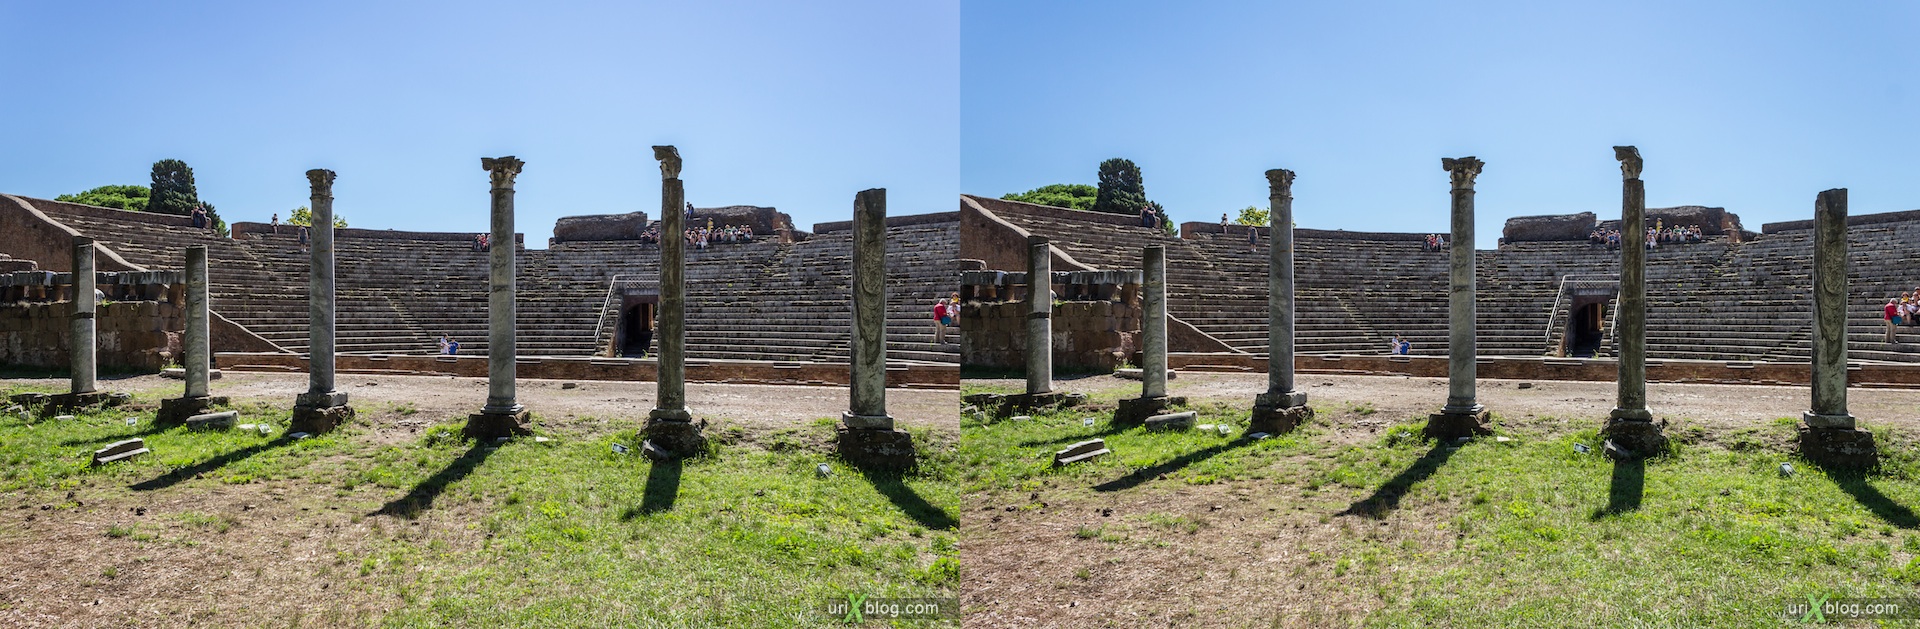 2012, Roman theater, Ostia Antica, Rome, Italy, ancient rome, city, 3D, stereo pair, cross-eyed, crossview, cross view stereo pair